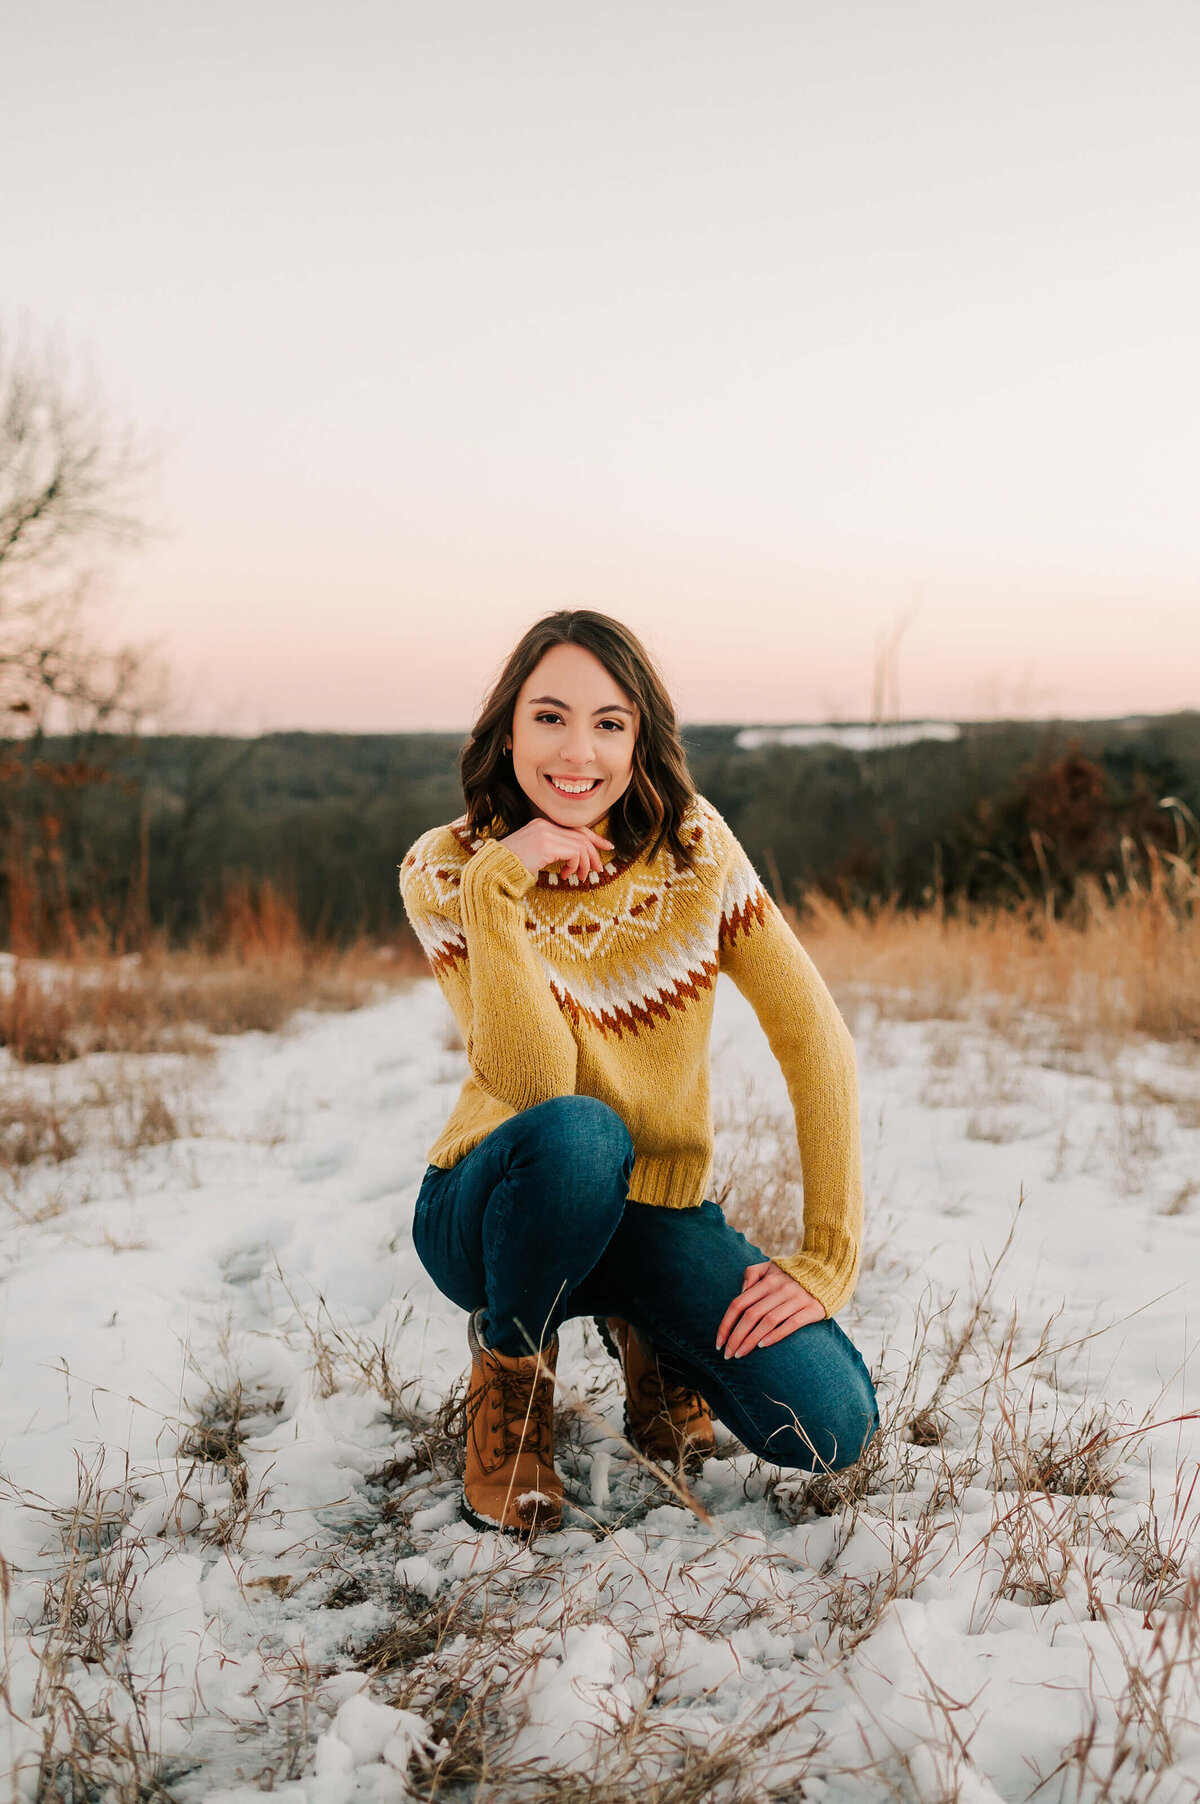 High school senior pictures of girl in yellow kneeling in snow in Springfield MO